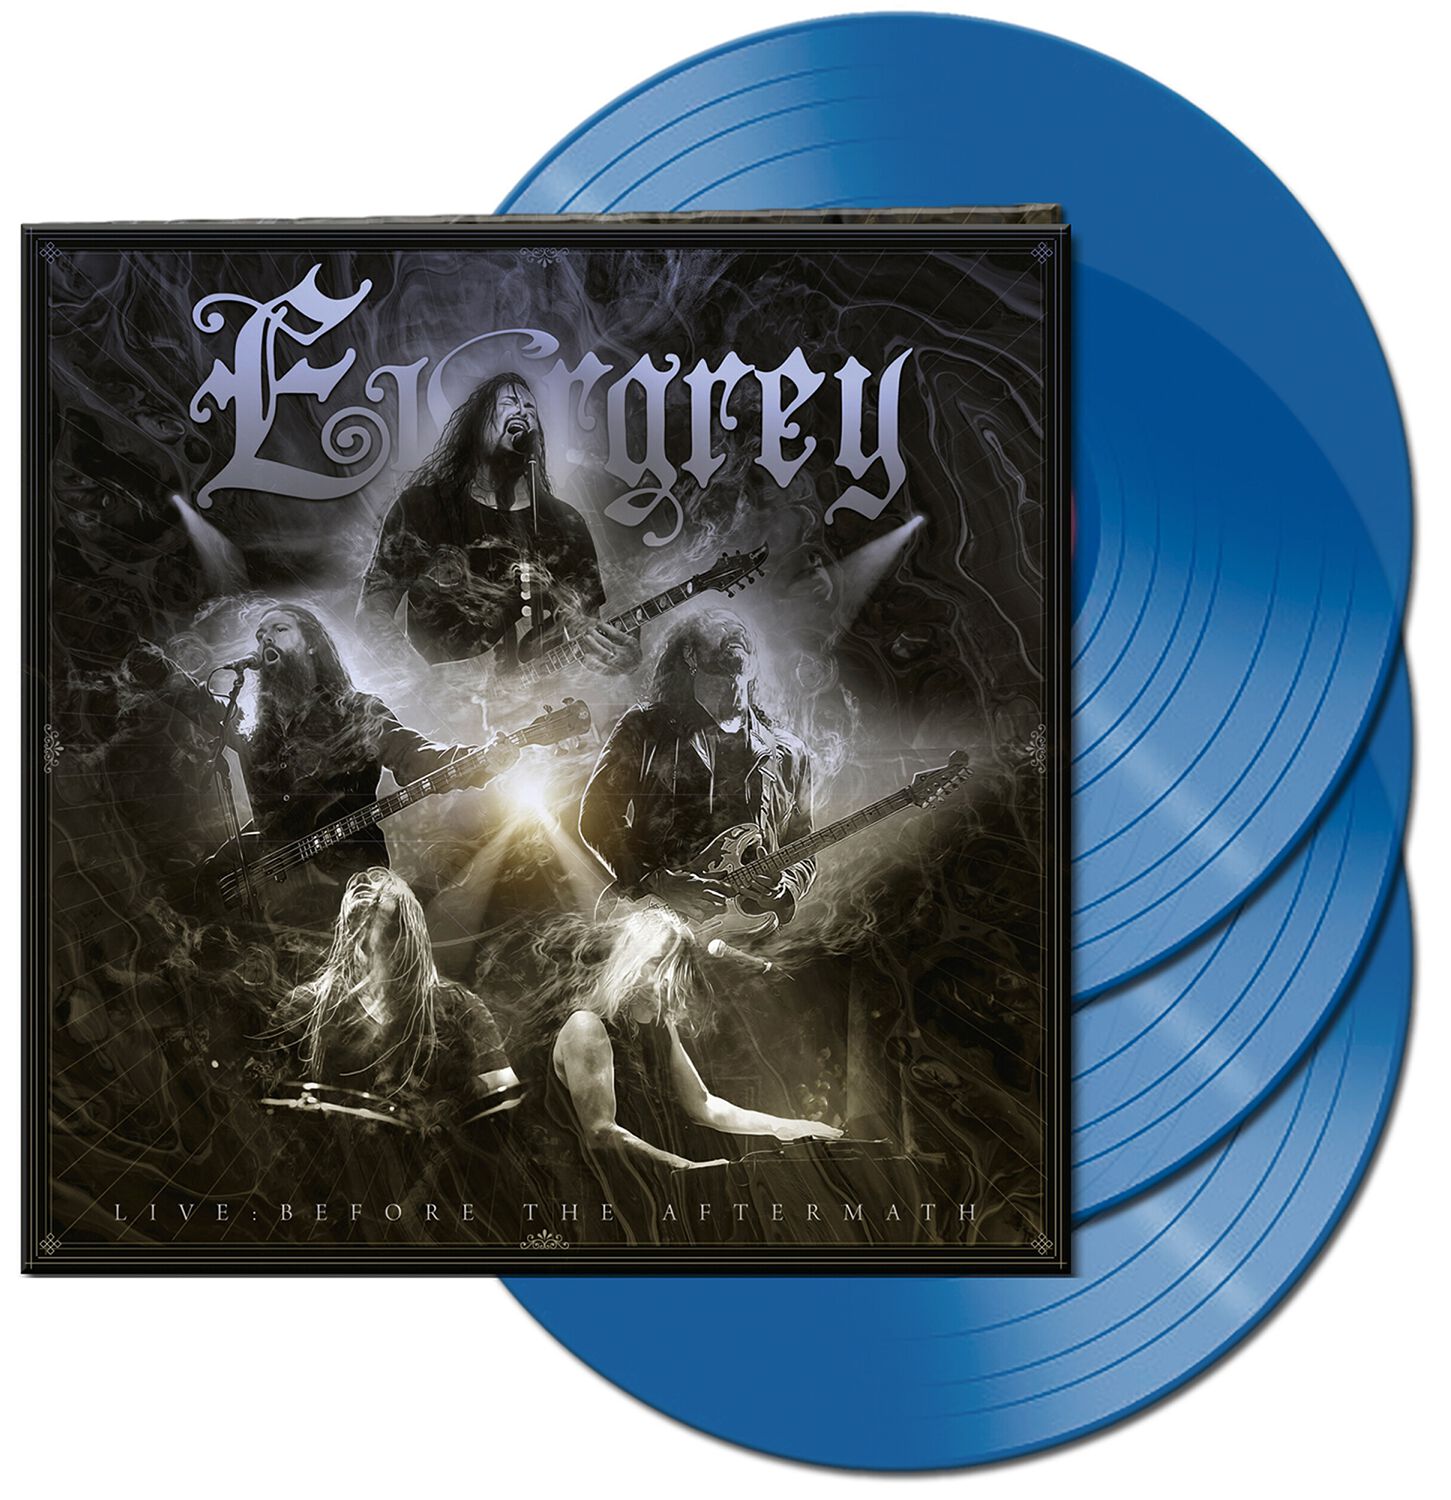 Image of LP di Evergrey - Before the aftermath (Live in Gothenburg) - Unisex - colorato